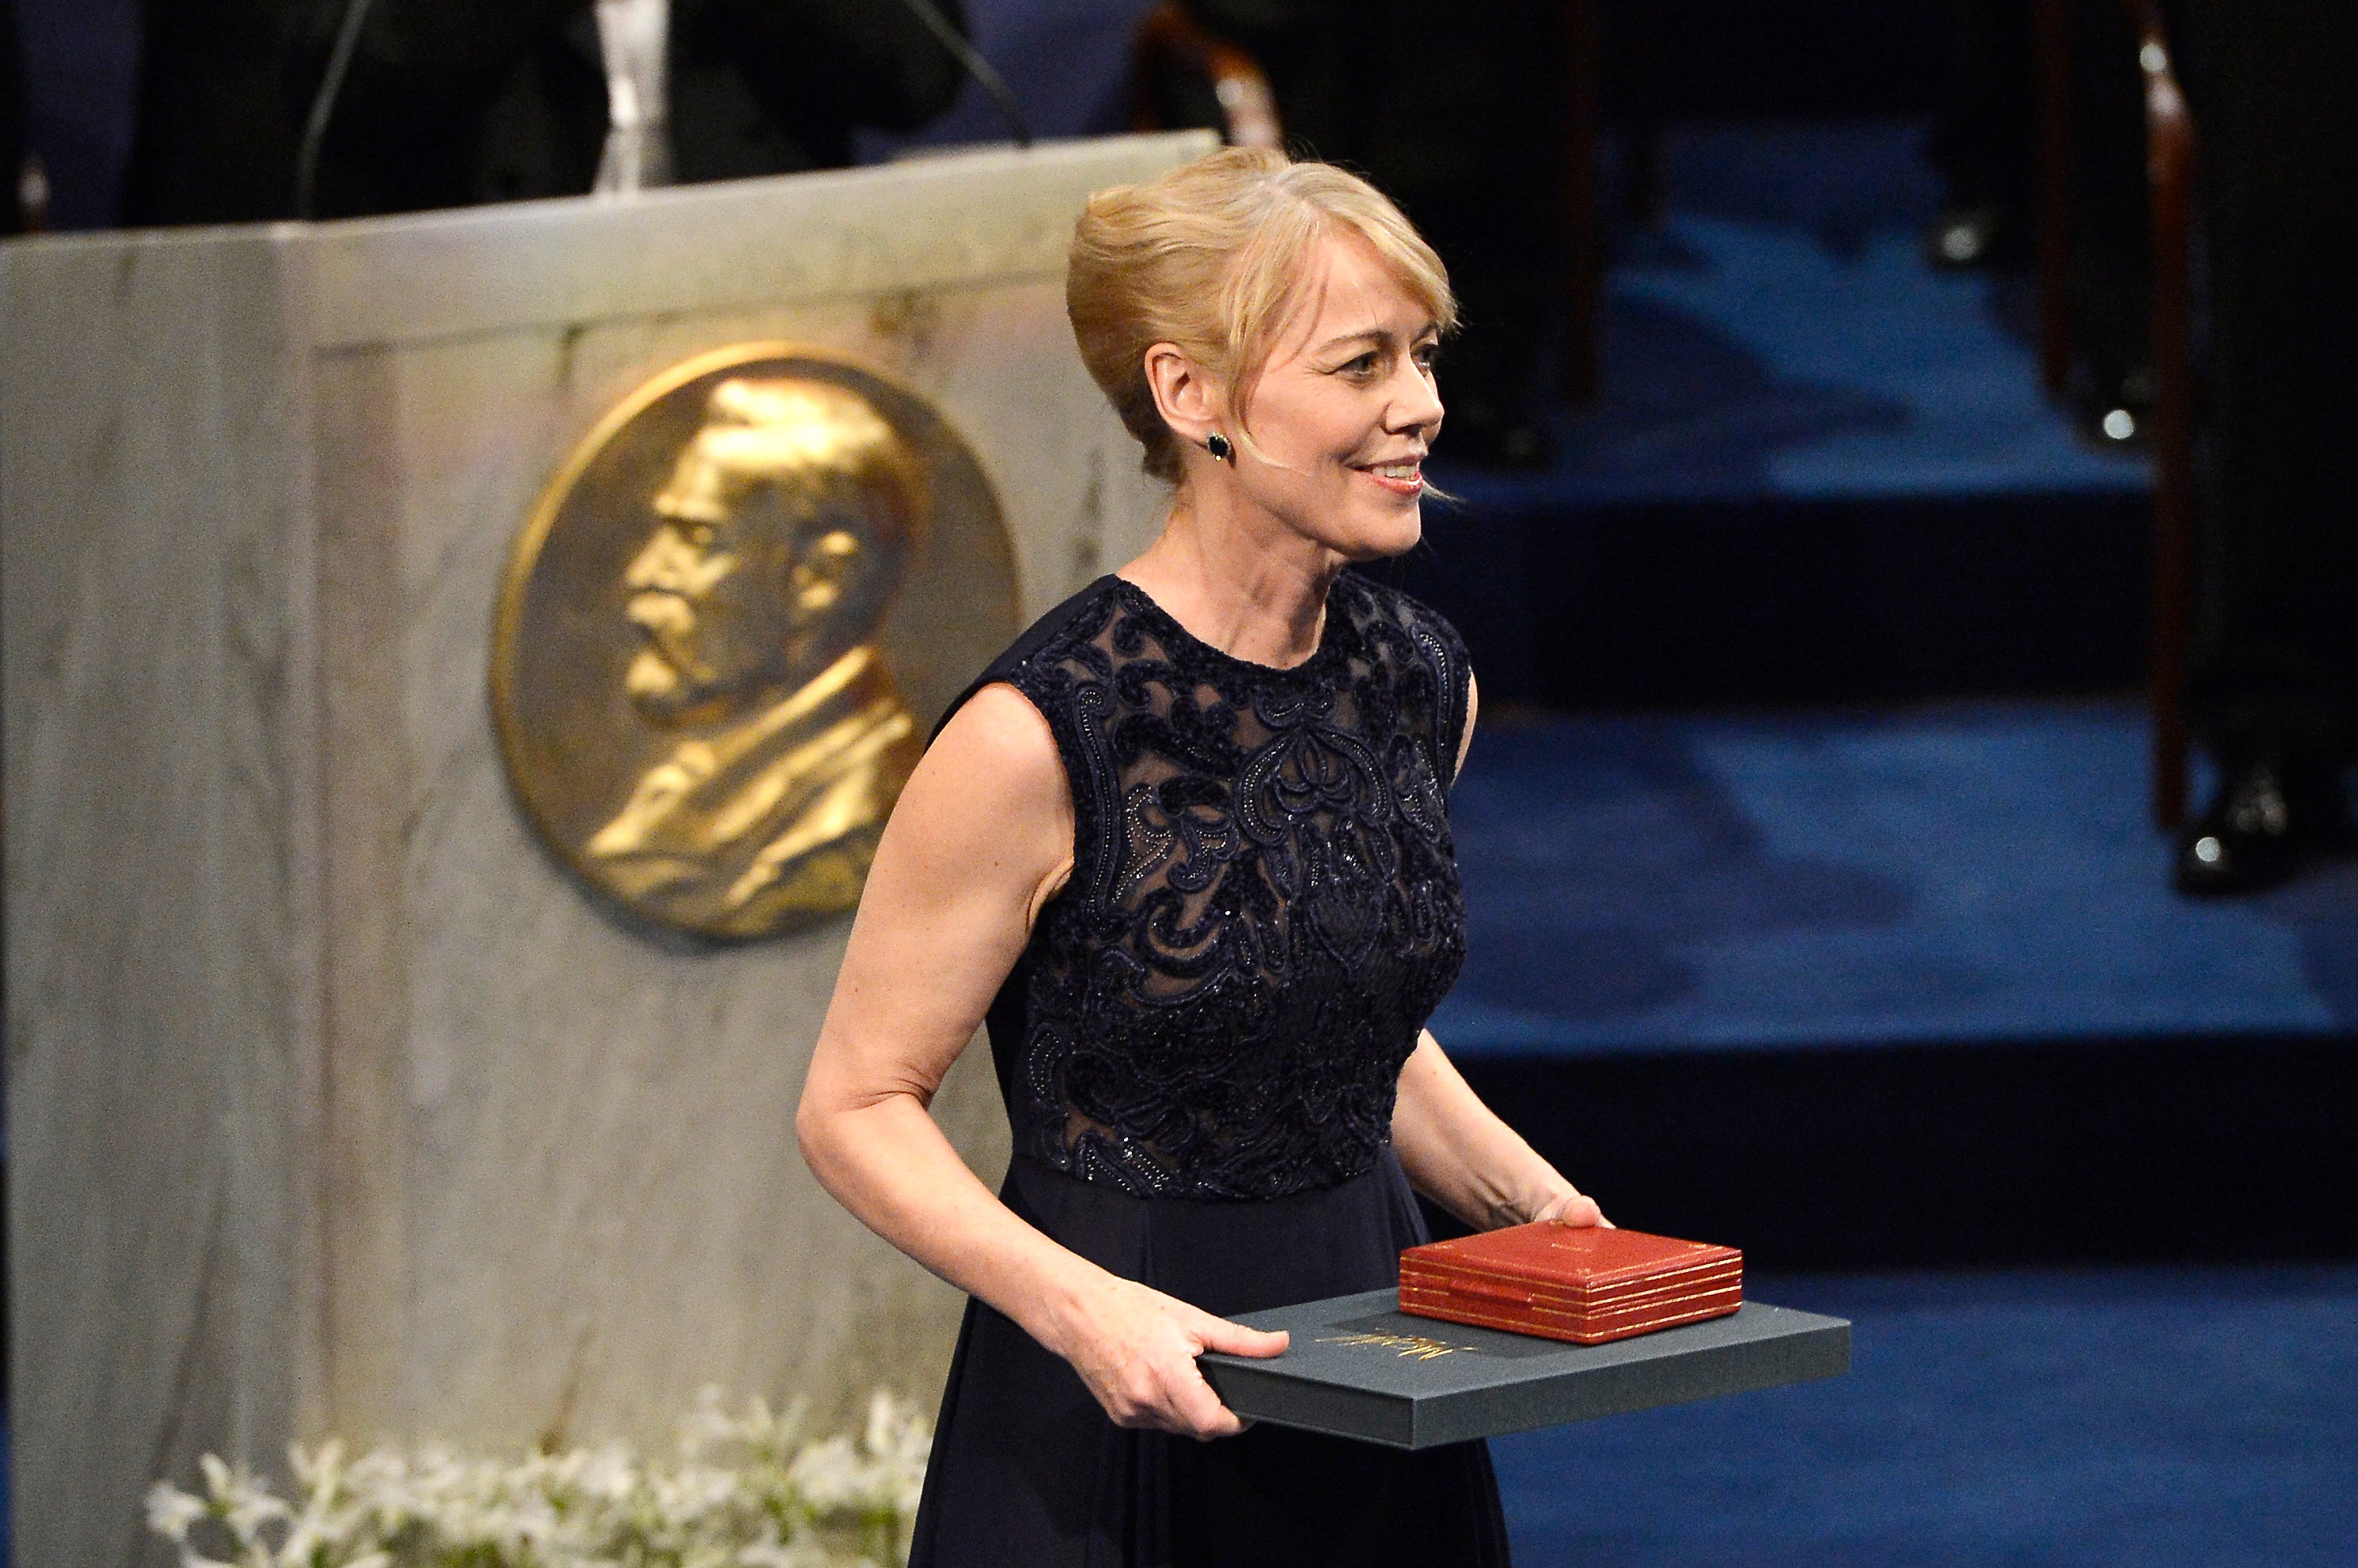 Alice Munro’s daughter, Jenny, accepts the Nobel Prize in Literature on her mother’s behalf in 2013